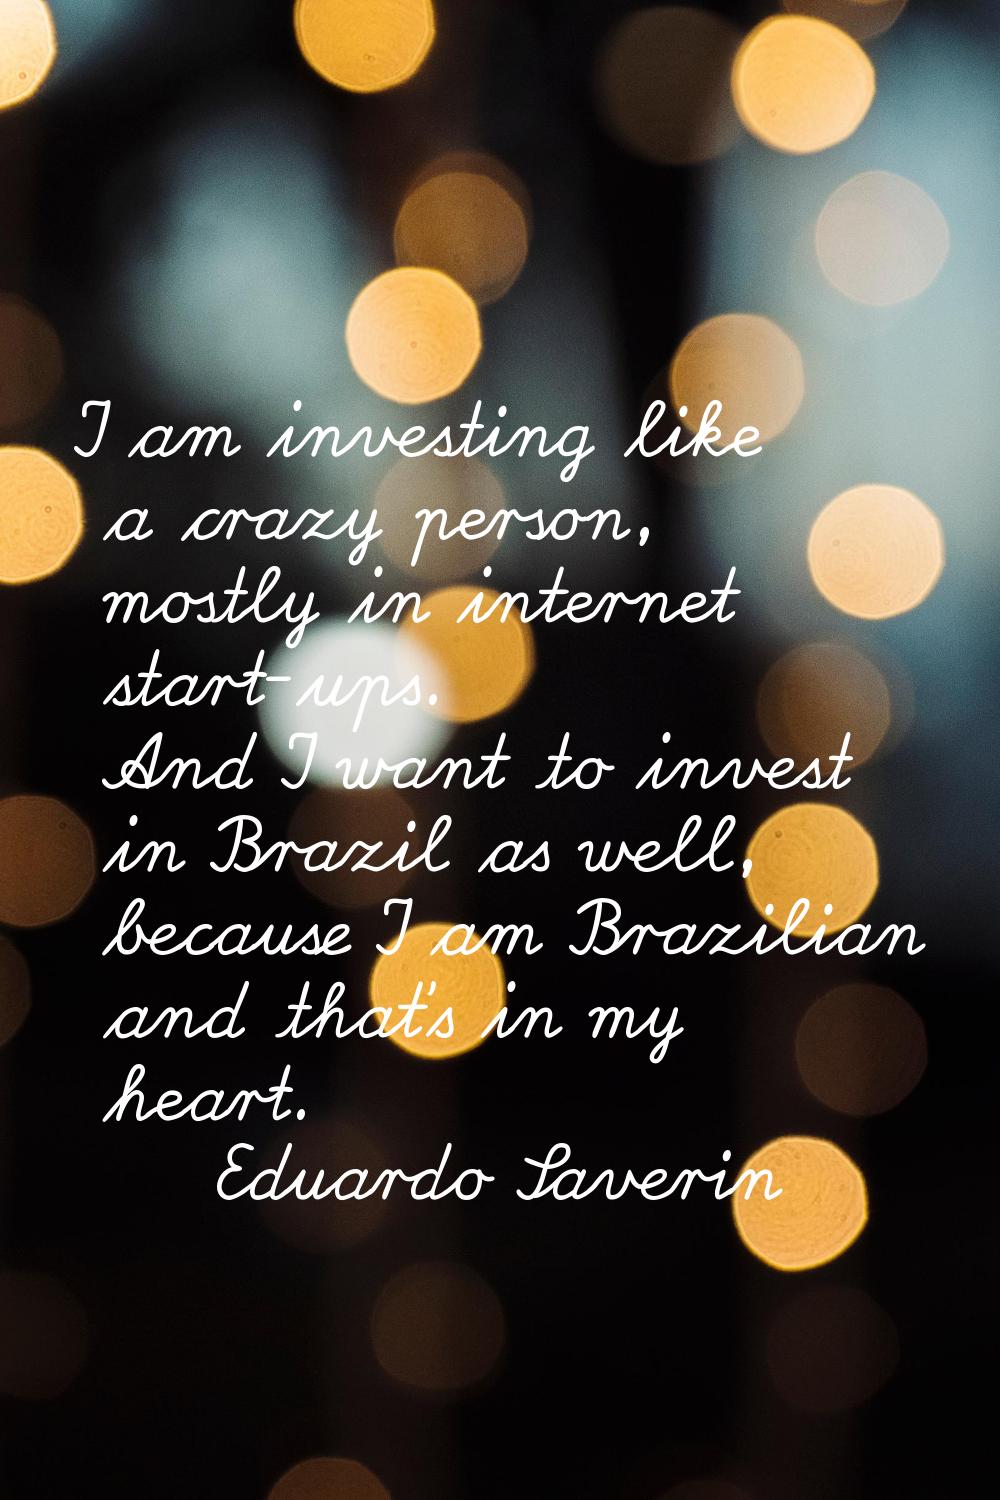 I am investing like a crazy person, mostly in internet start-ups. And I want to invest in Brazil as